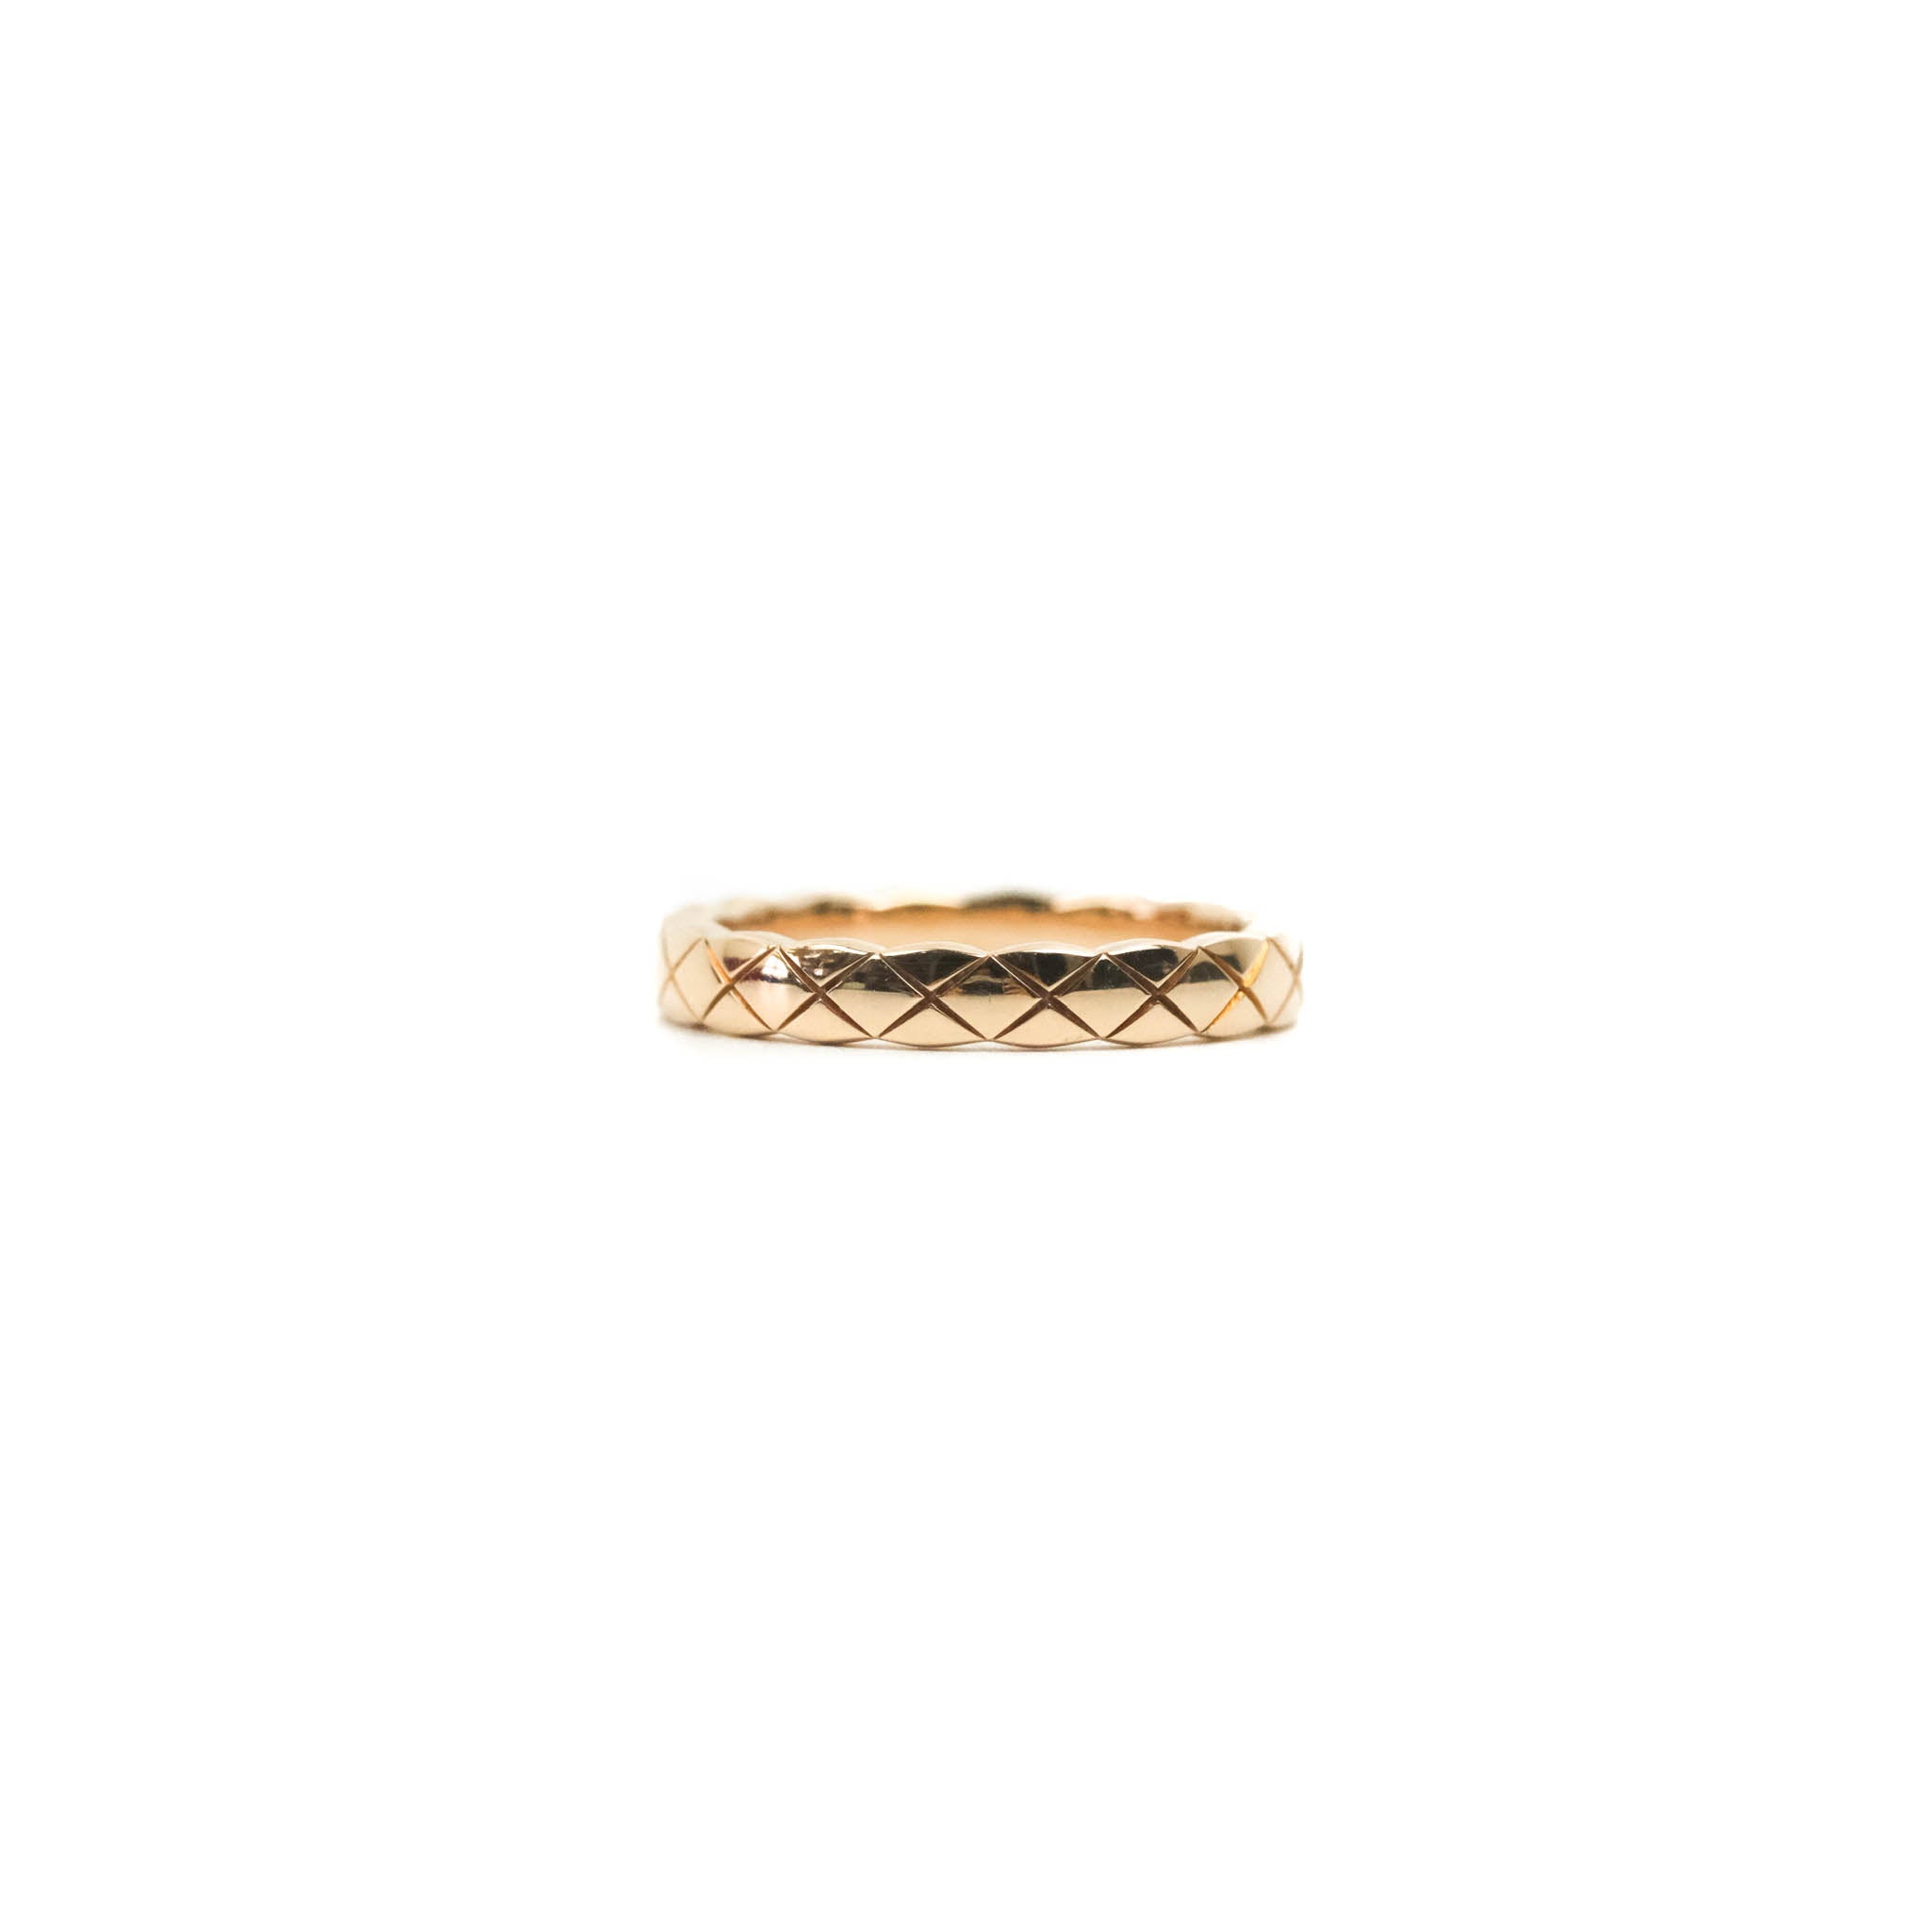 Chanel Coco Crush Ring 18K Beige Gold Size 52 – Coco Approved